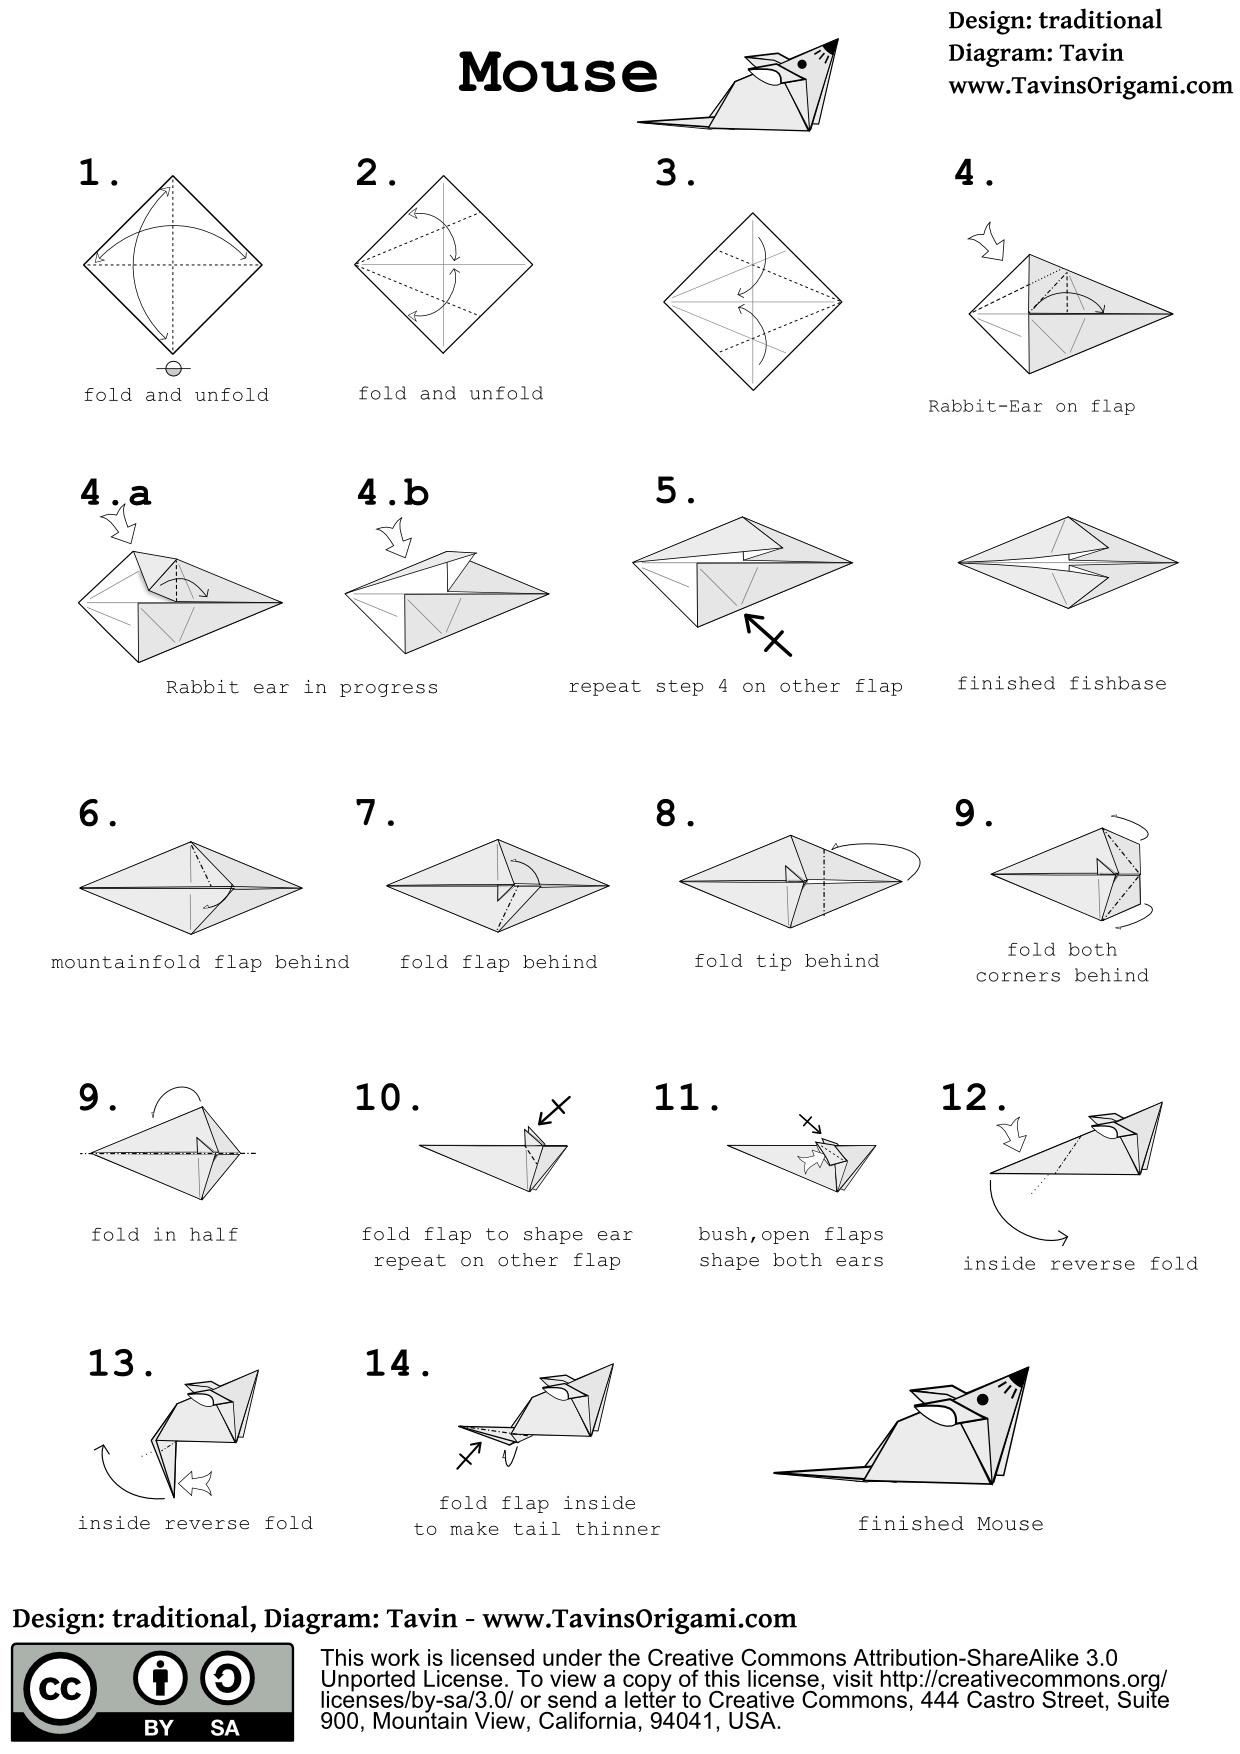 Simple Origami Instructions How To Fold A Simple Origami Mouse Tavins Origami Wonderhowto